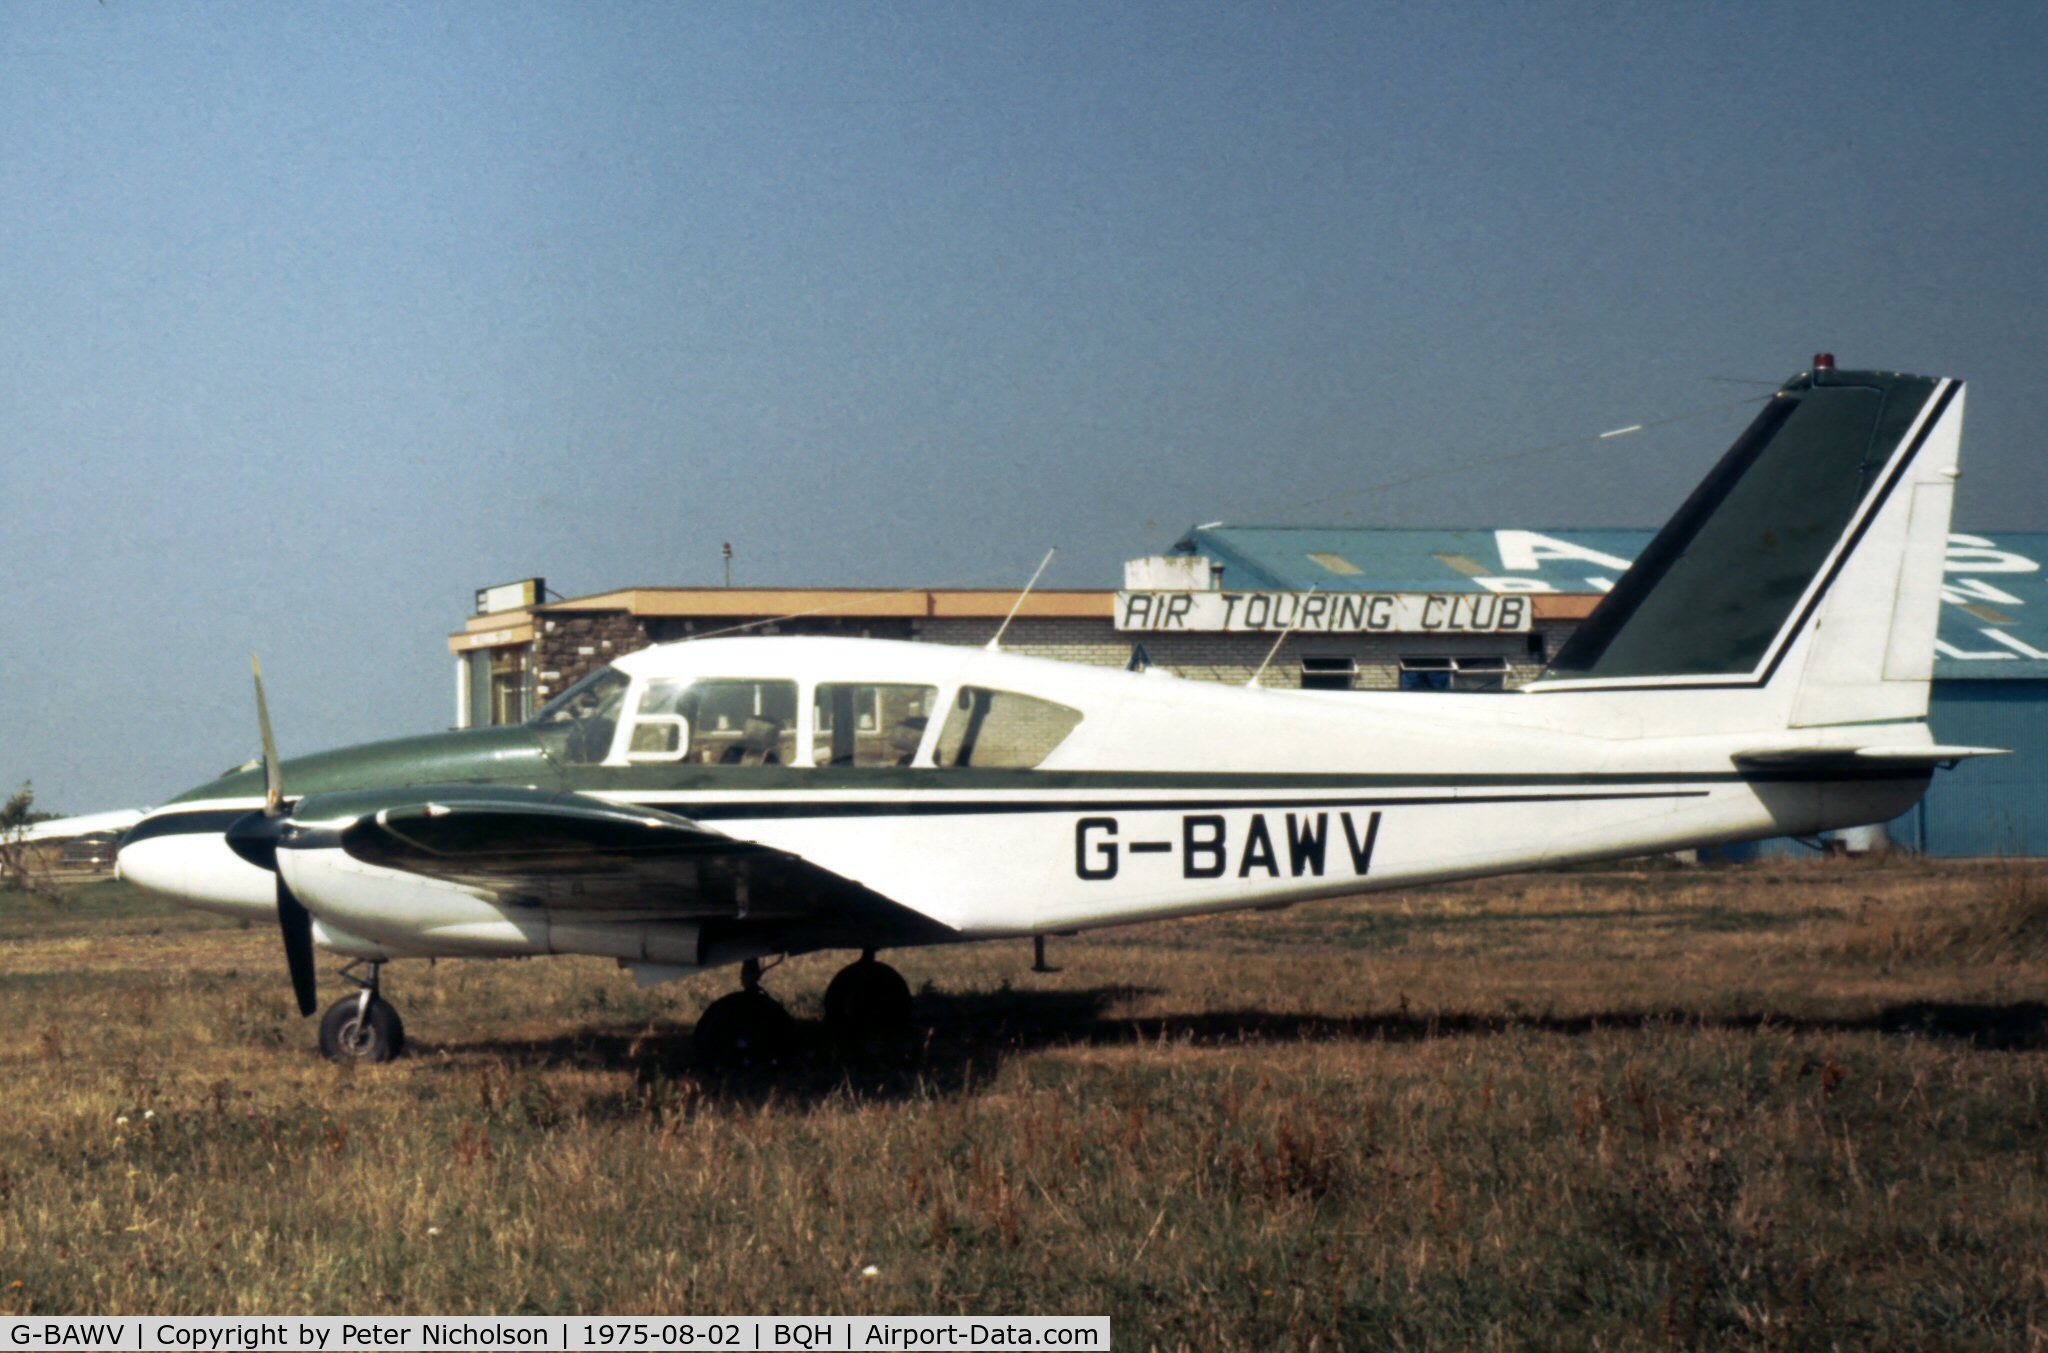 G-BAWV, 1963 Piper PA-23-250 Aztec C/N 27-2316, This Aztec was seen at Biggin Hill in the Summer of 1975.